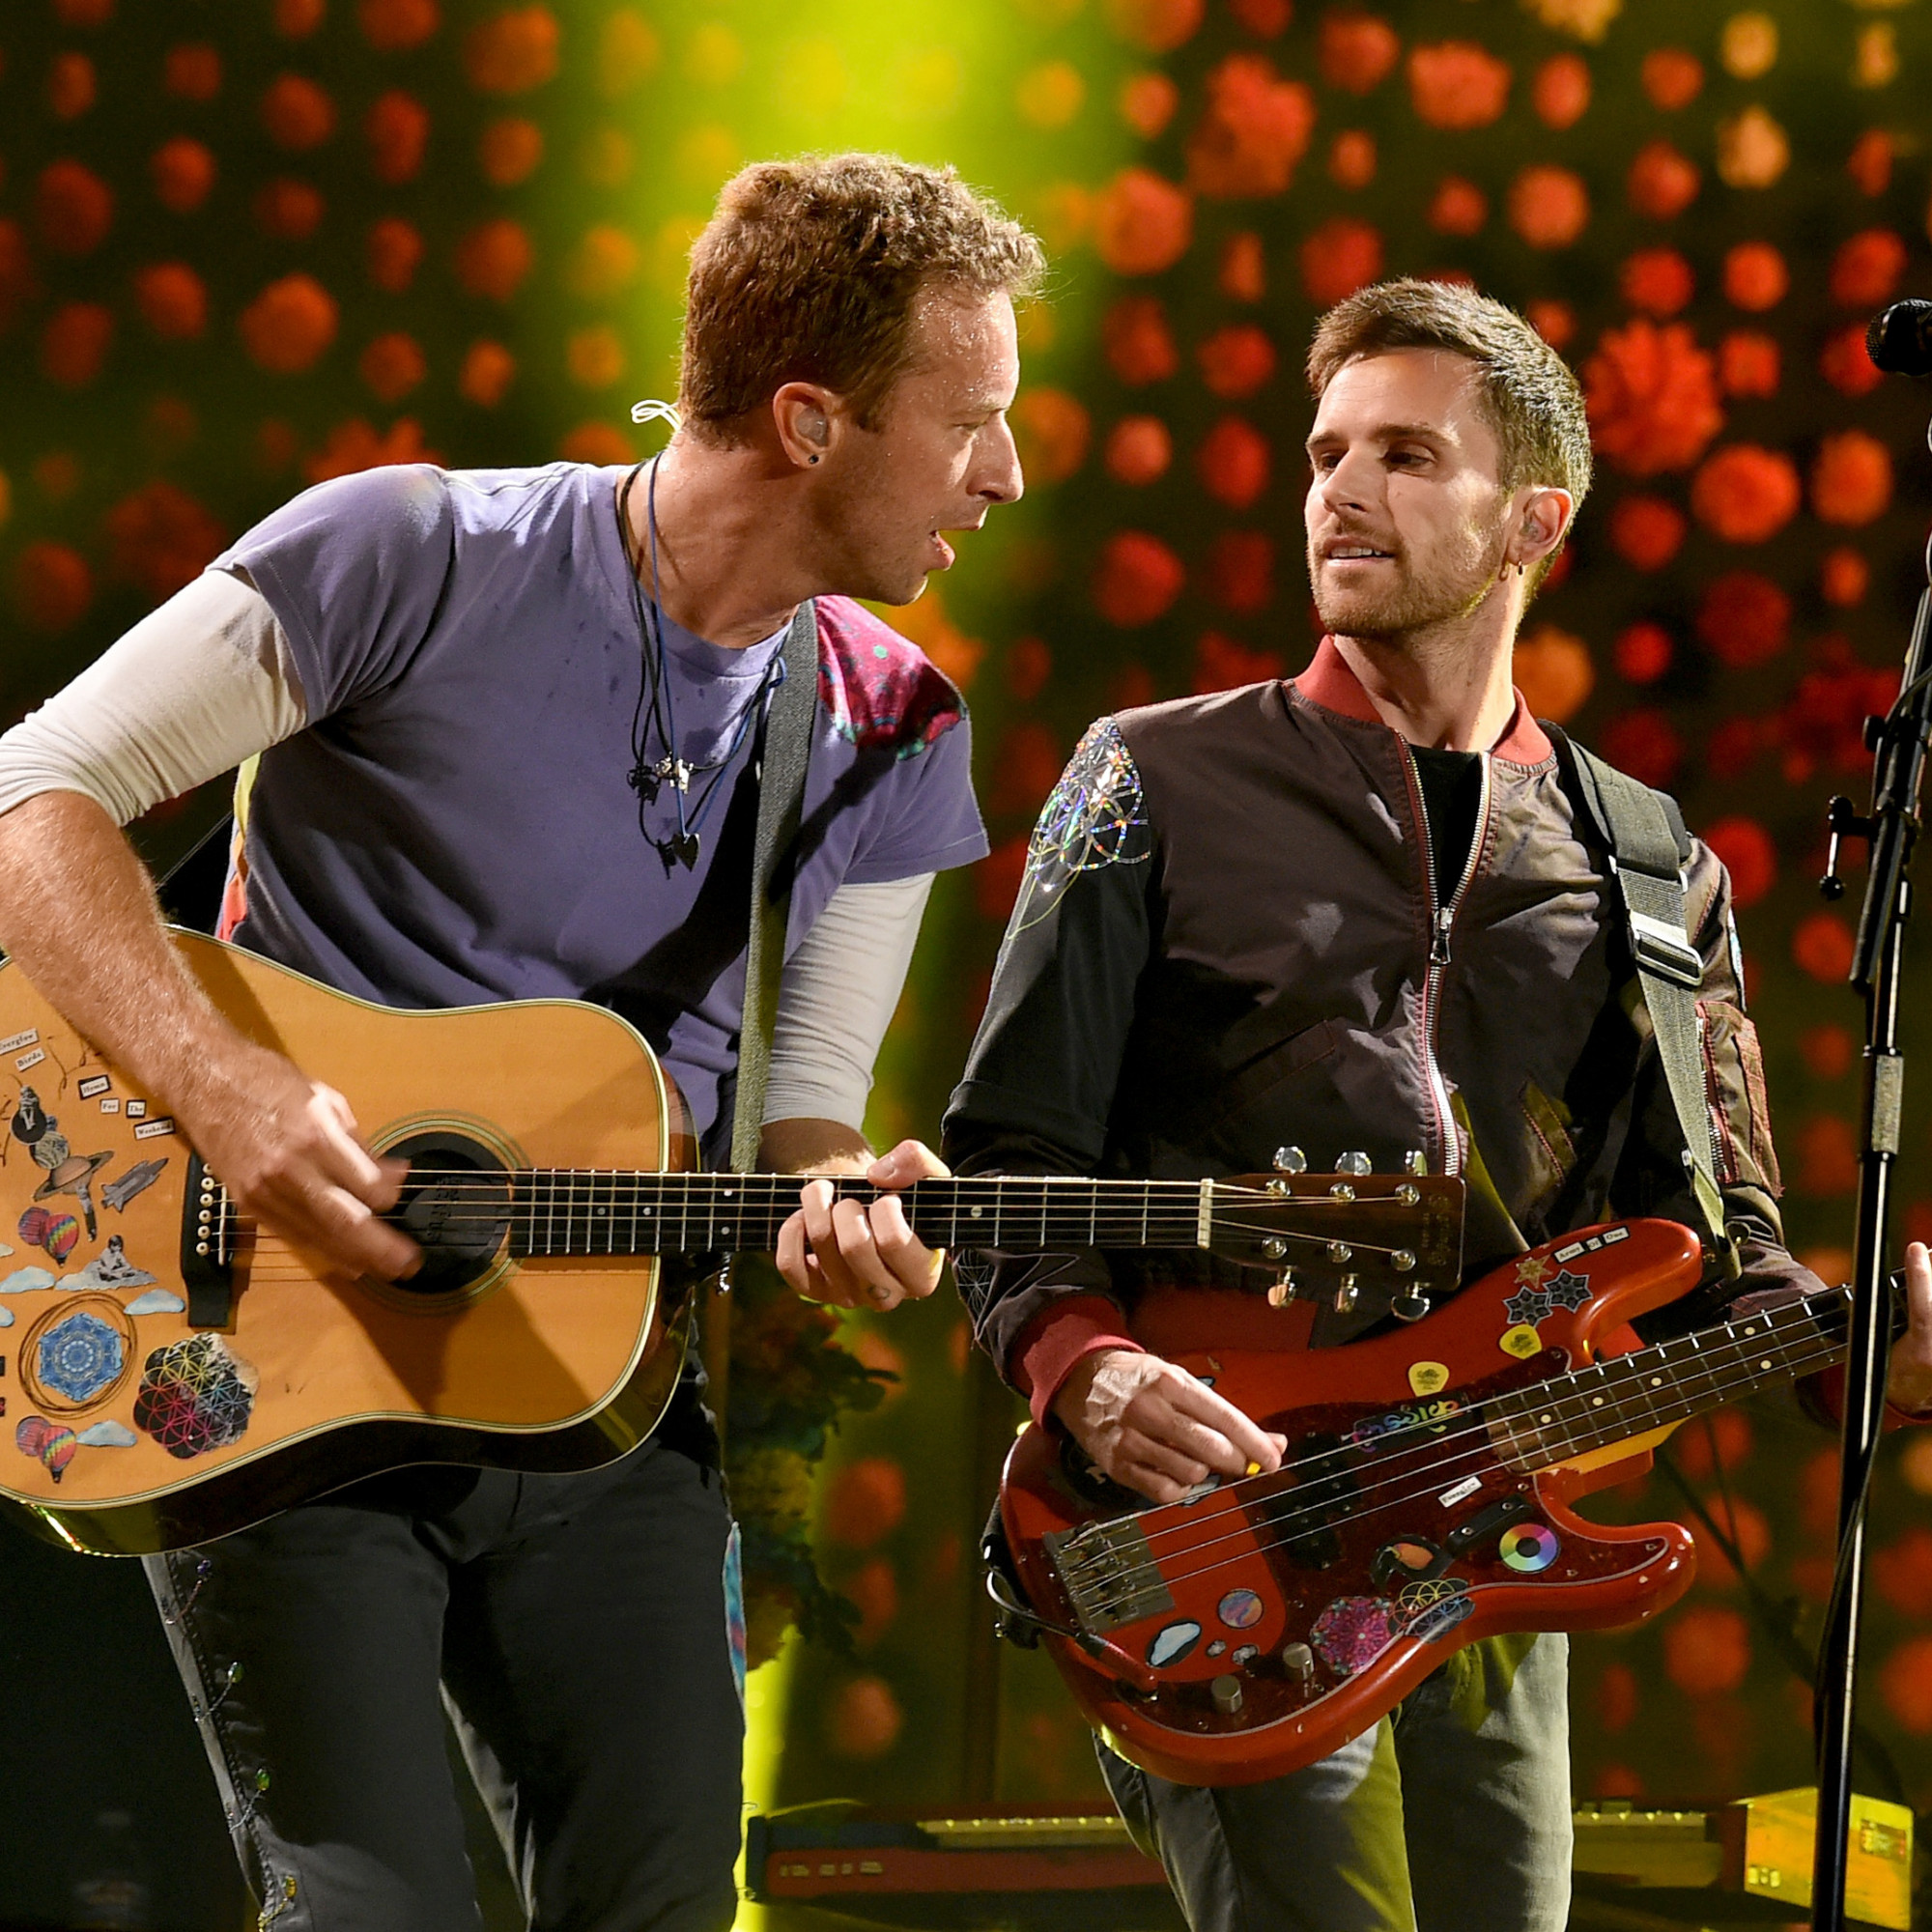 Chris Martin from Coldplay Diagnosed with A Serious Lung Infection!